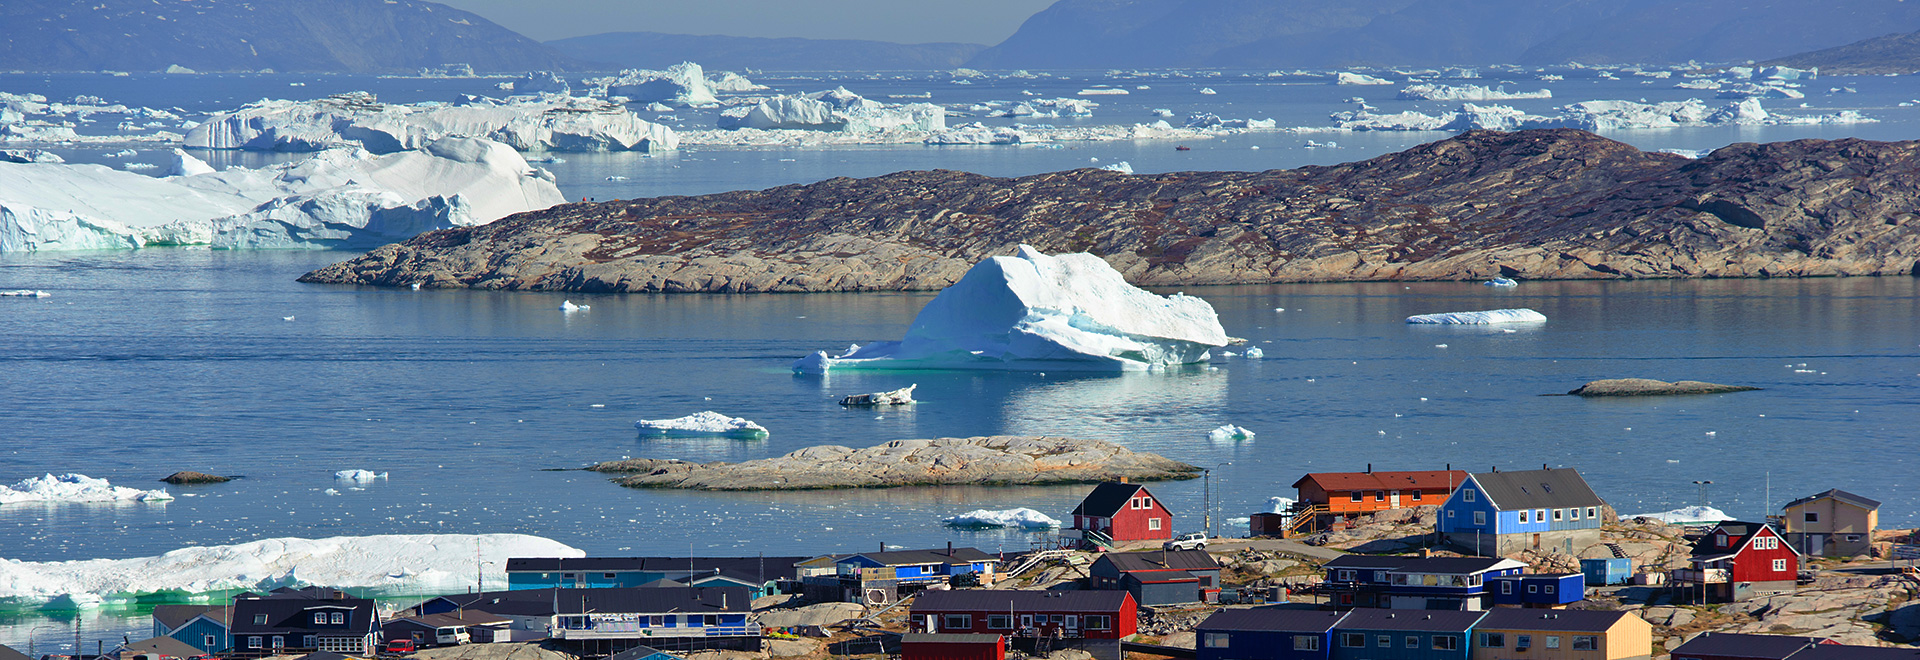 Northwest Passage Disko Bay Colorful Houses MH